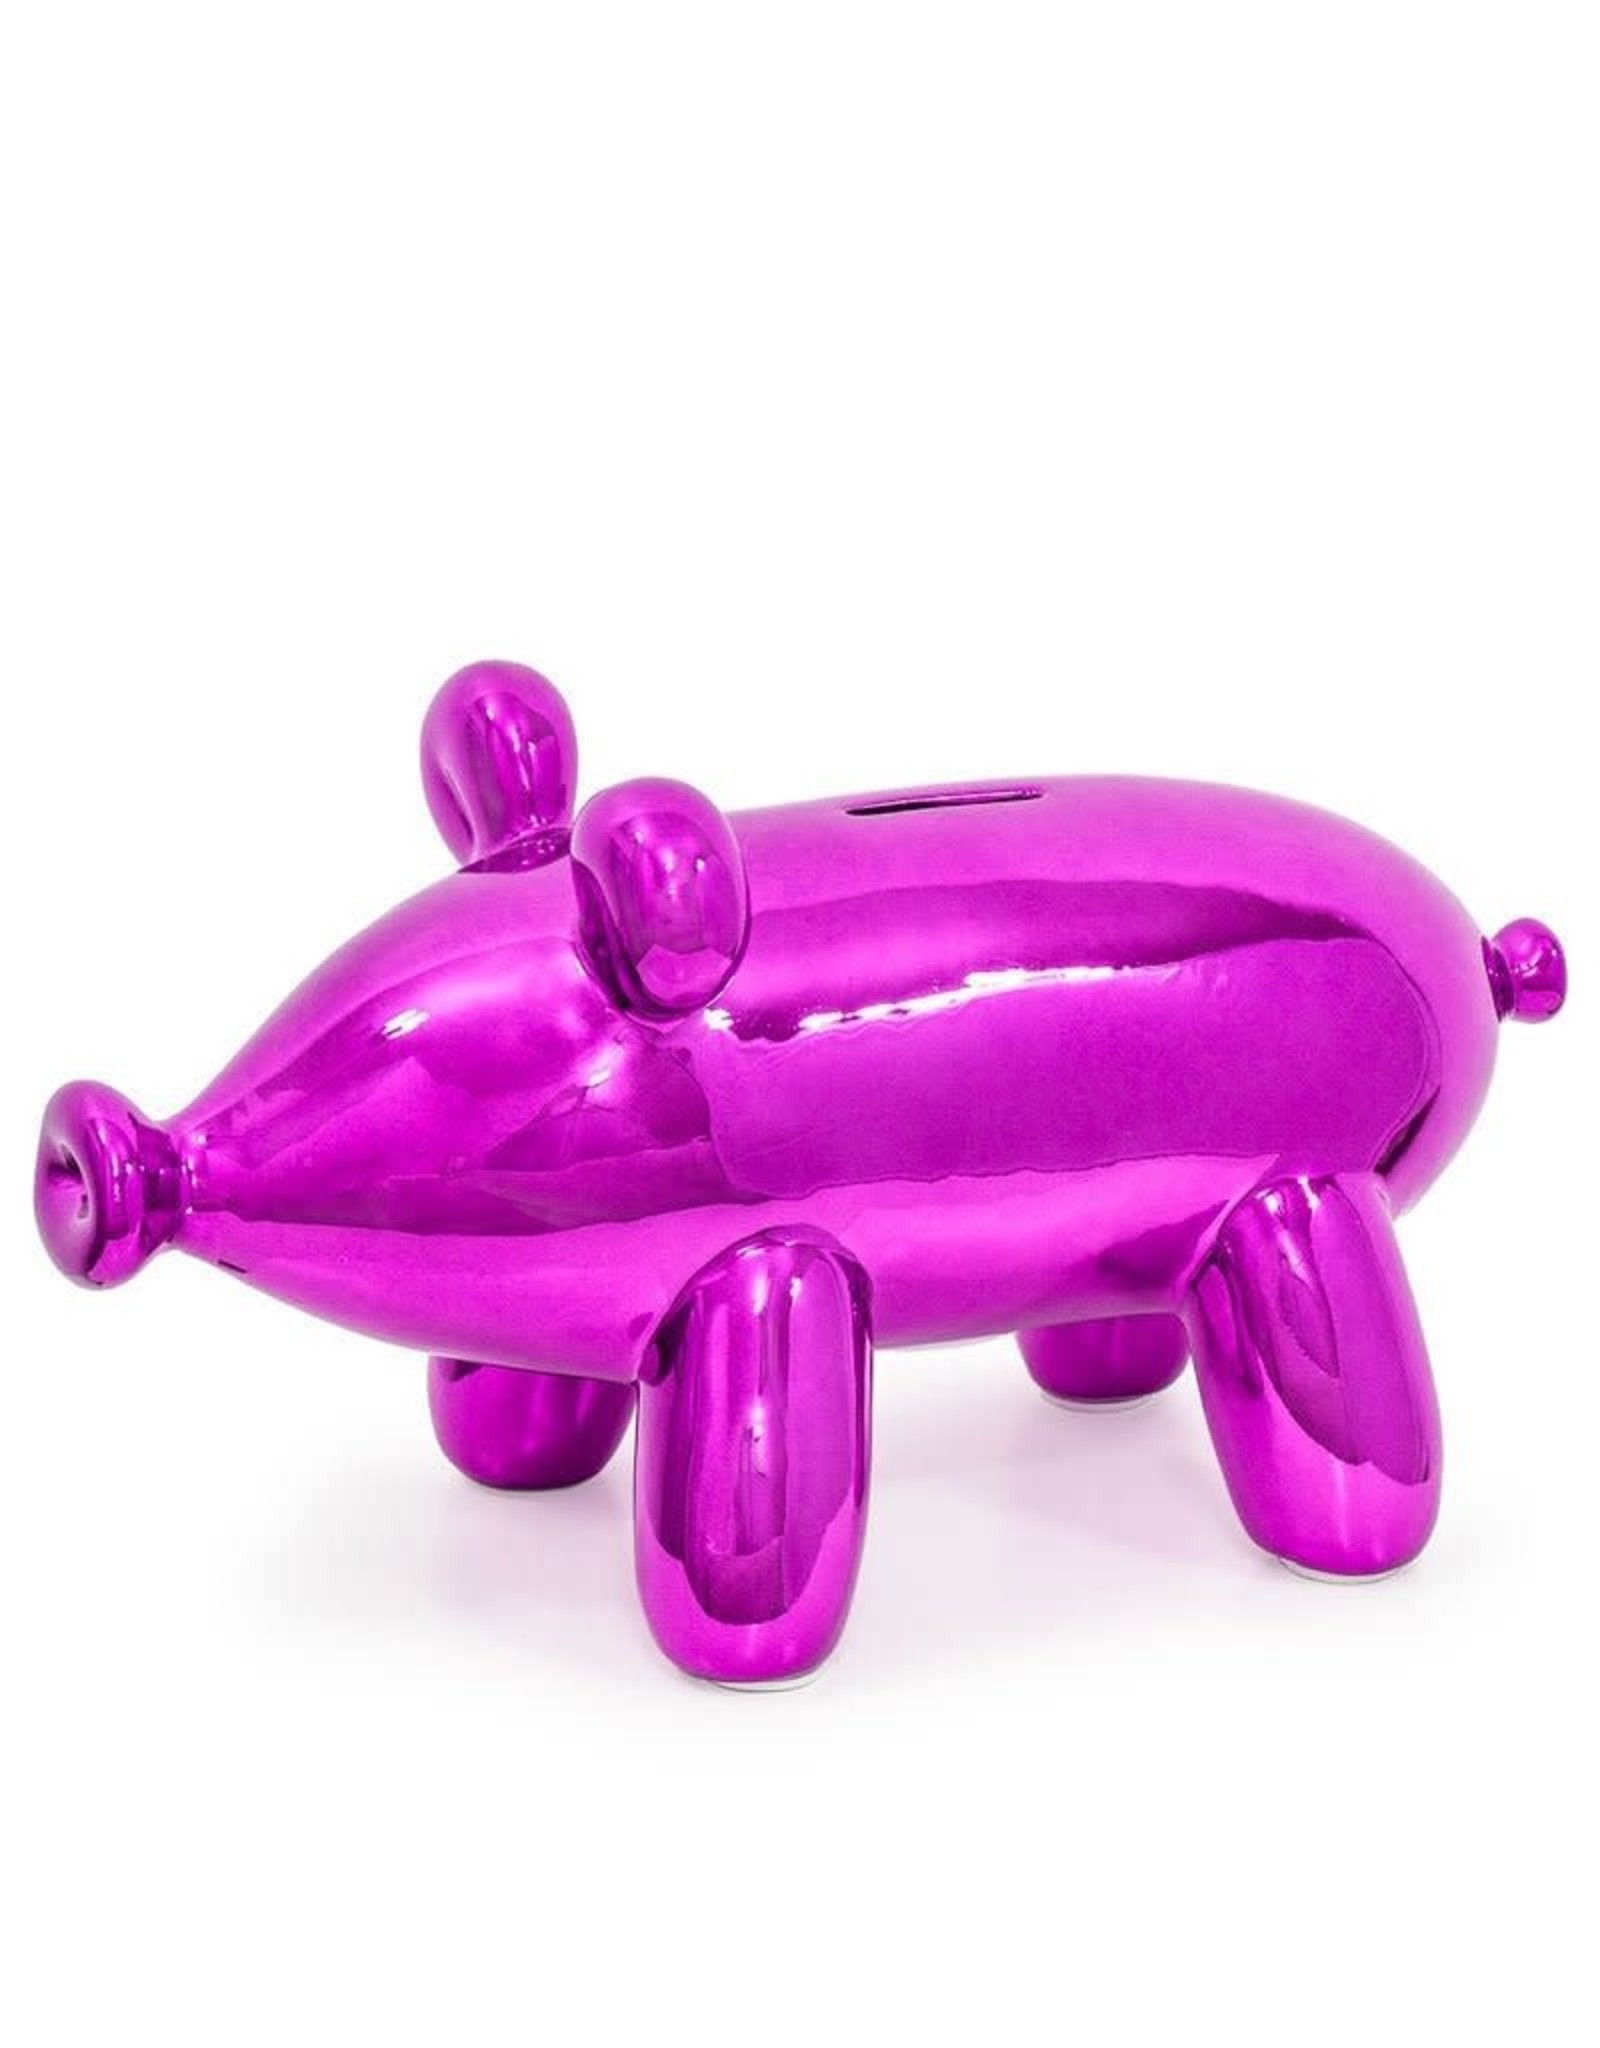 Made by humans 2 Piggy Bank (Assorted Colors)